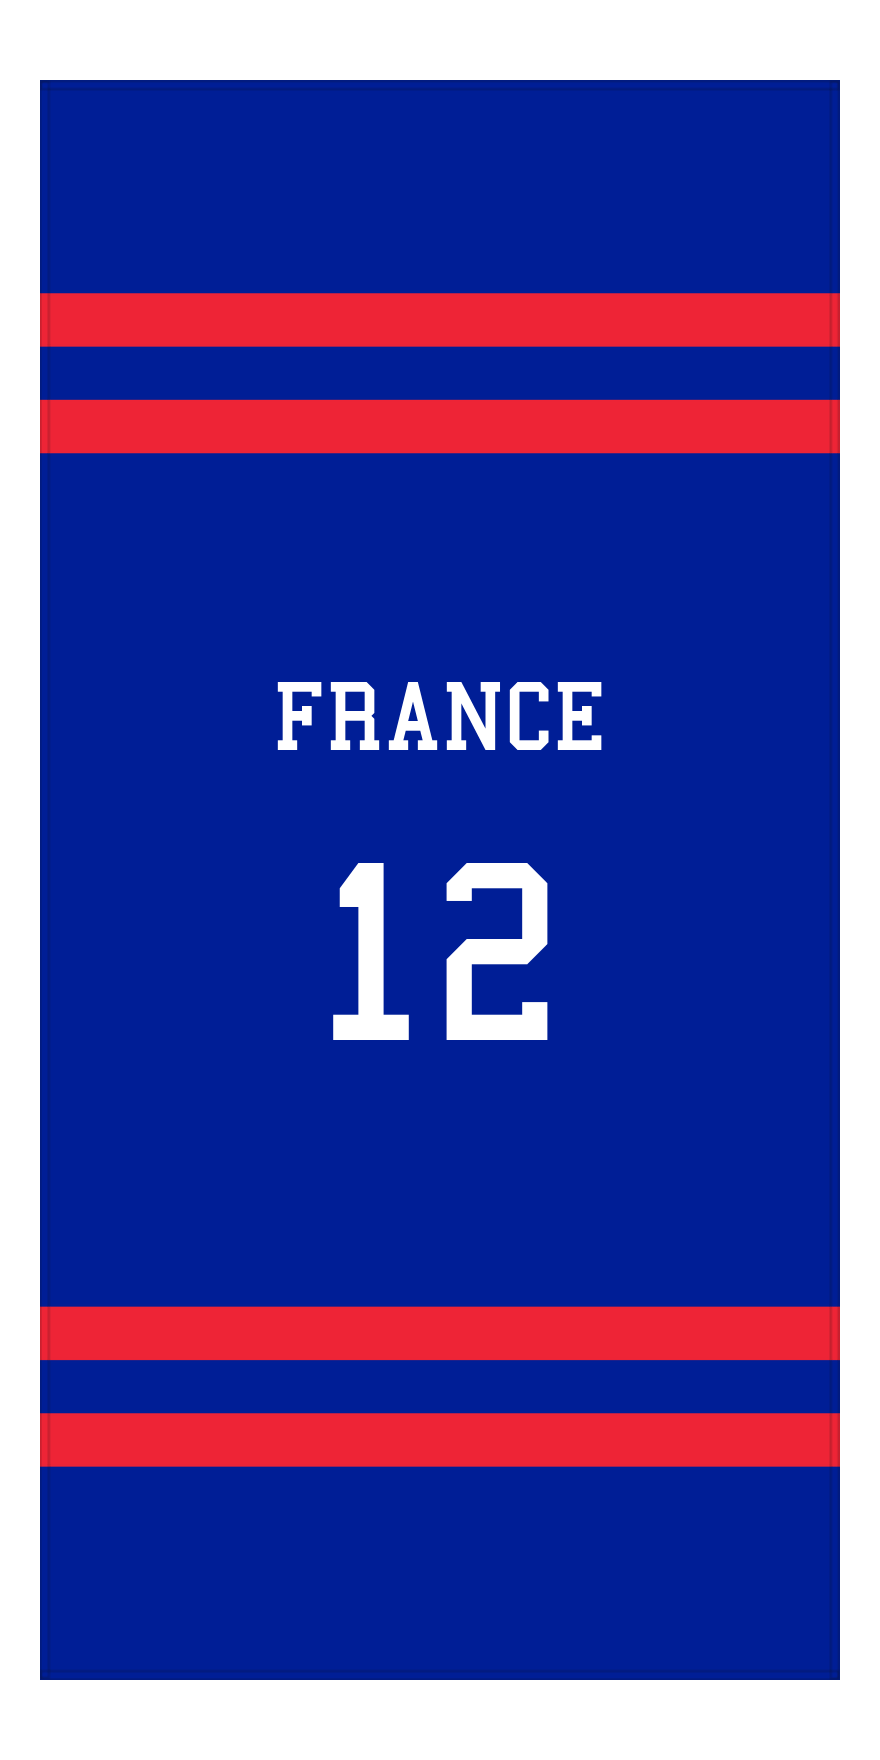 Personalized Jersey Number 2-on-none Stripes Sports Beach Towel - France - Vertical Design - Front View